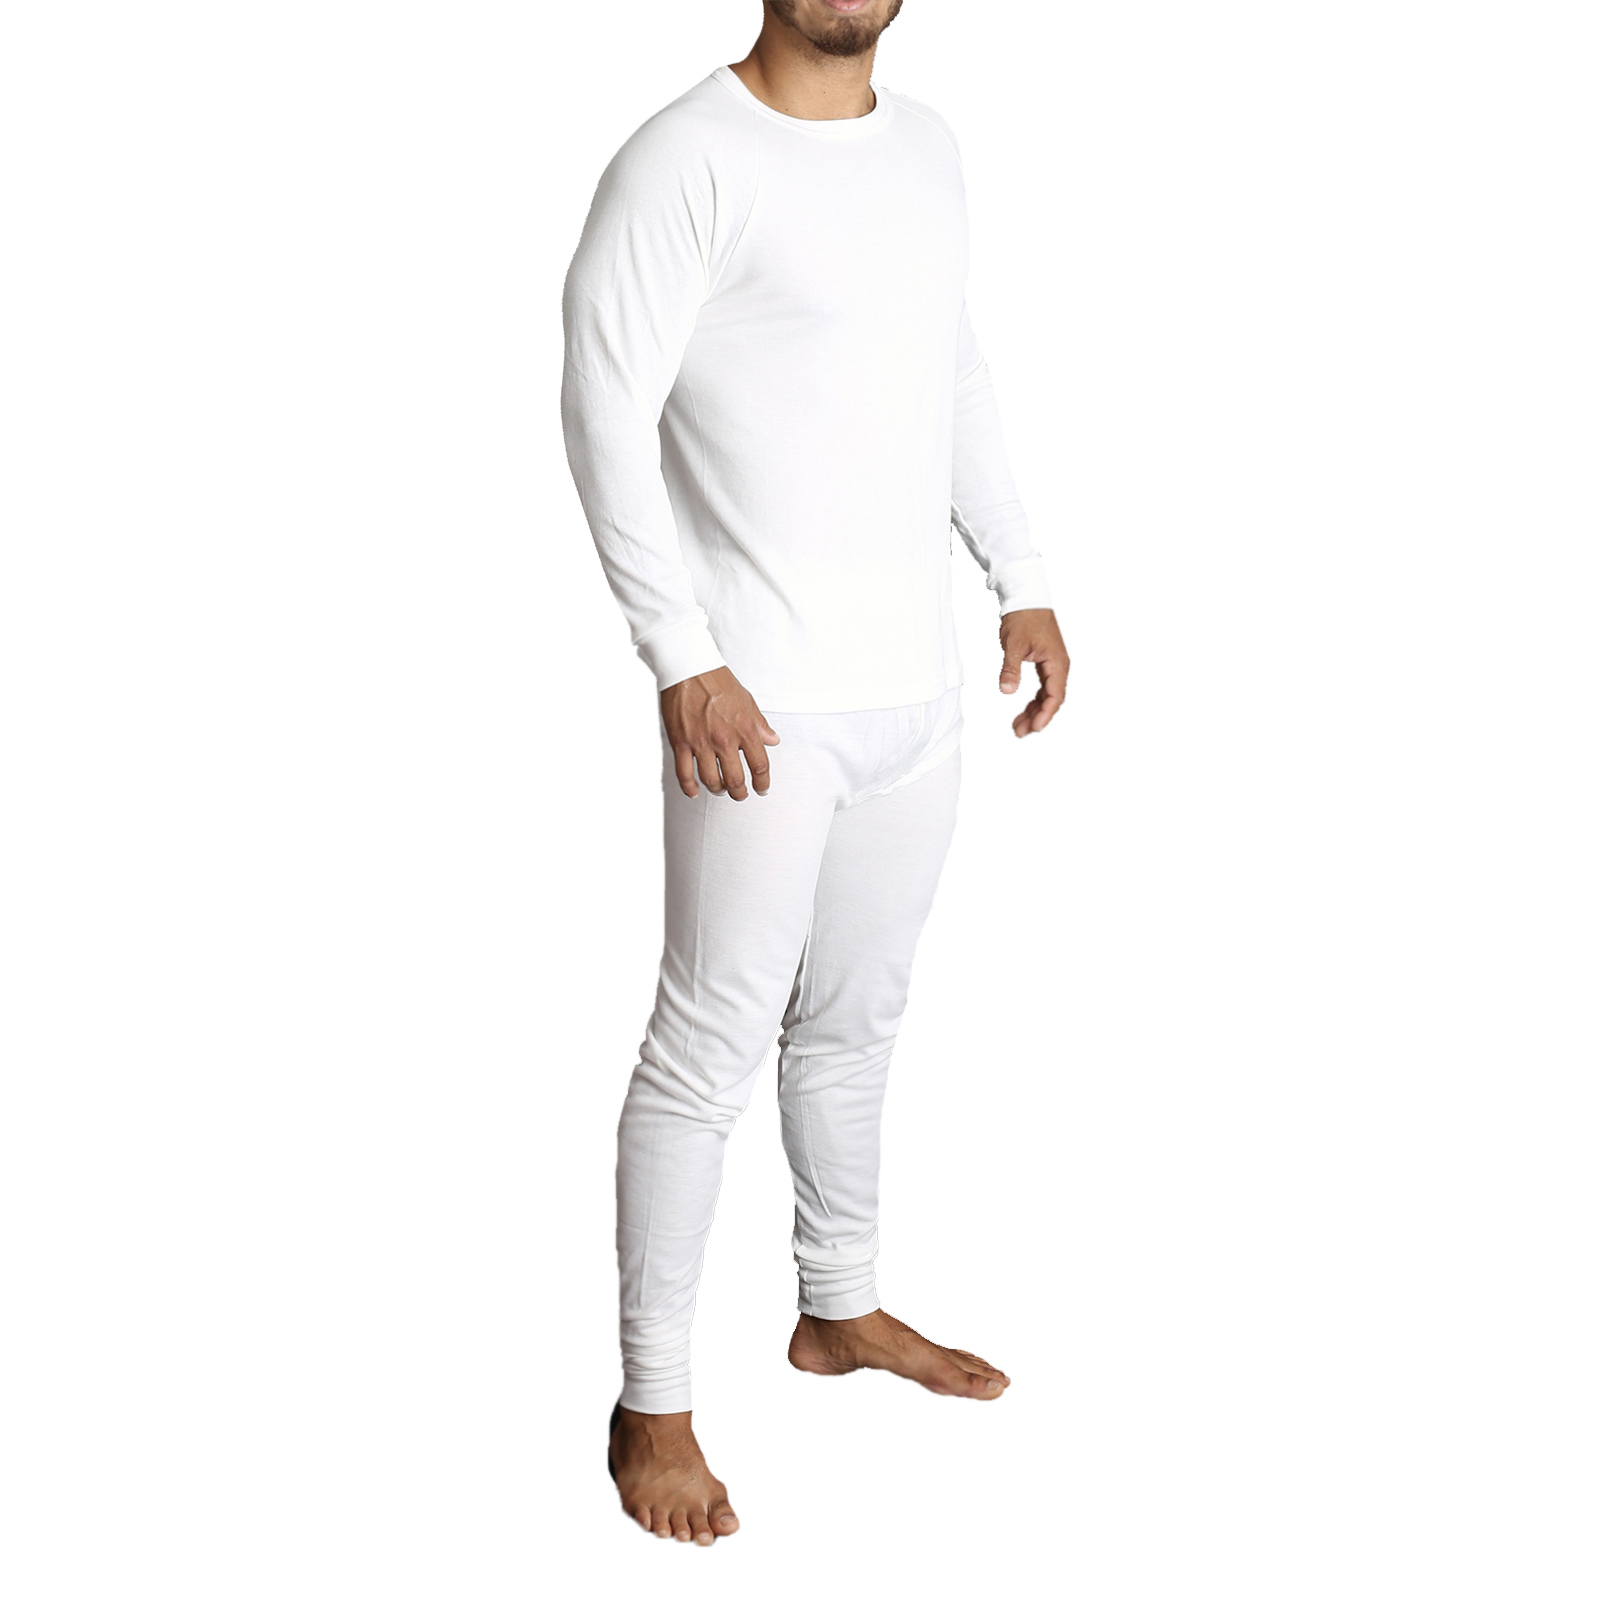 Men's merino wool long johns with fly